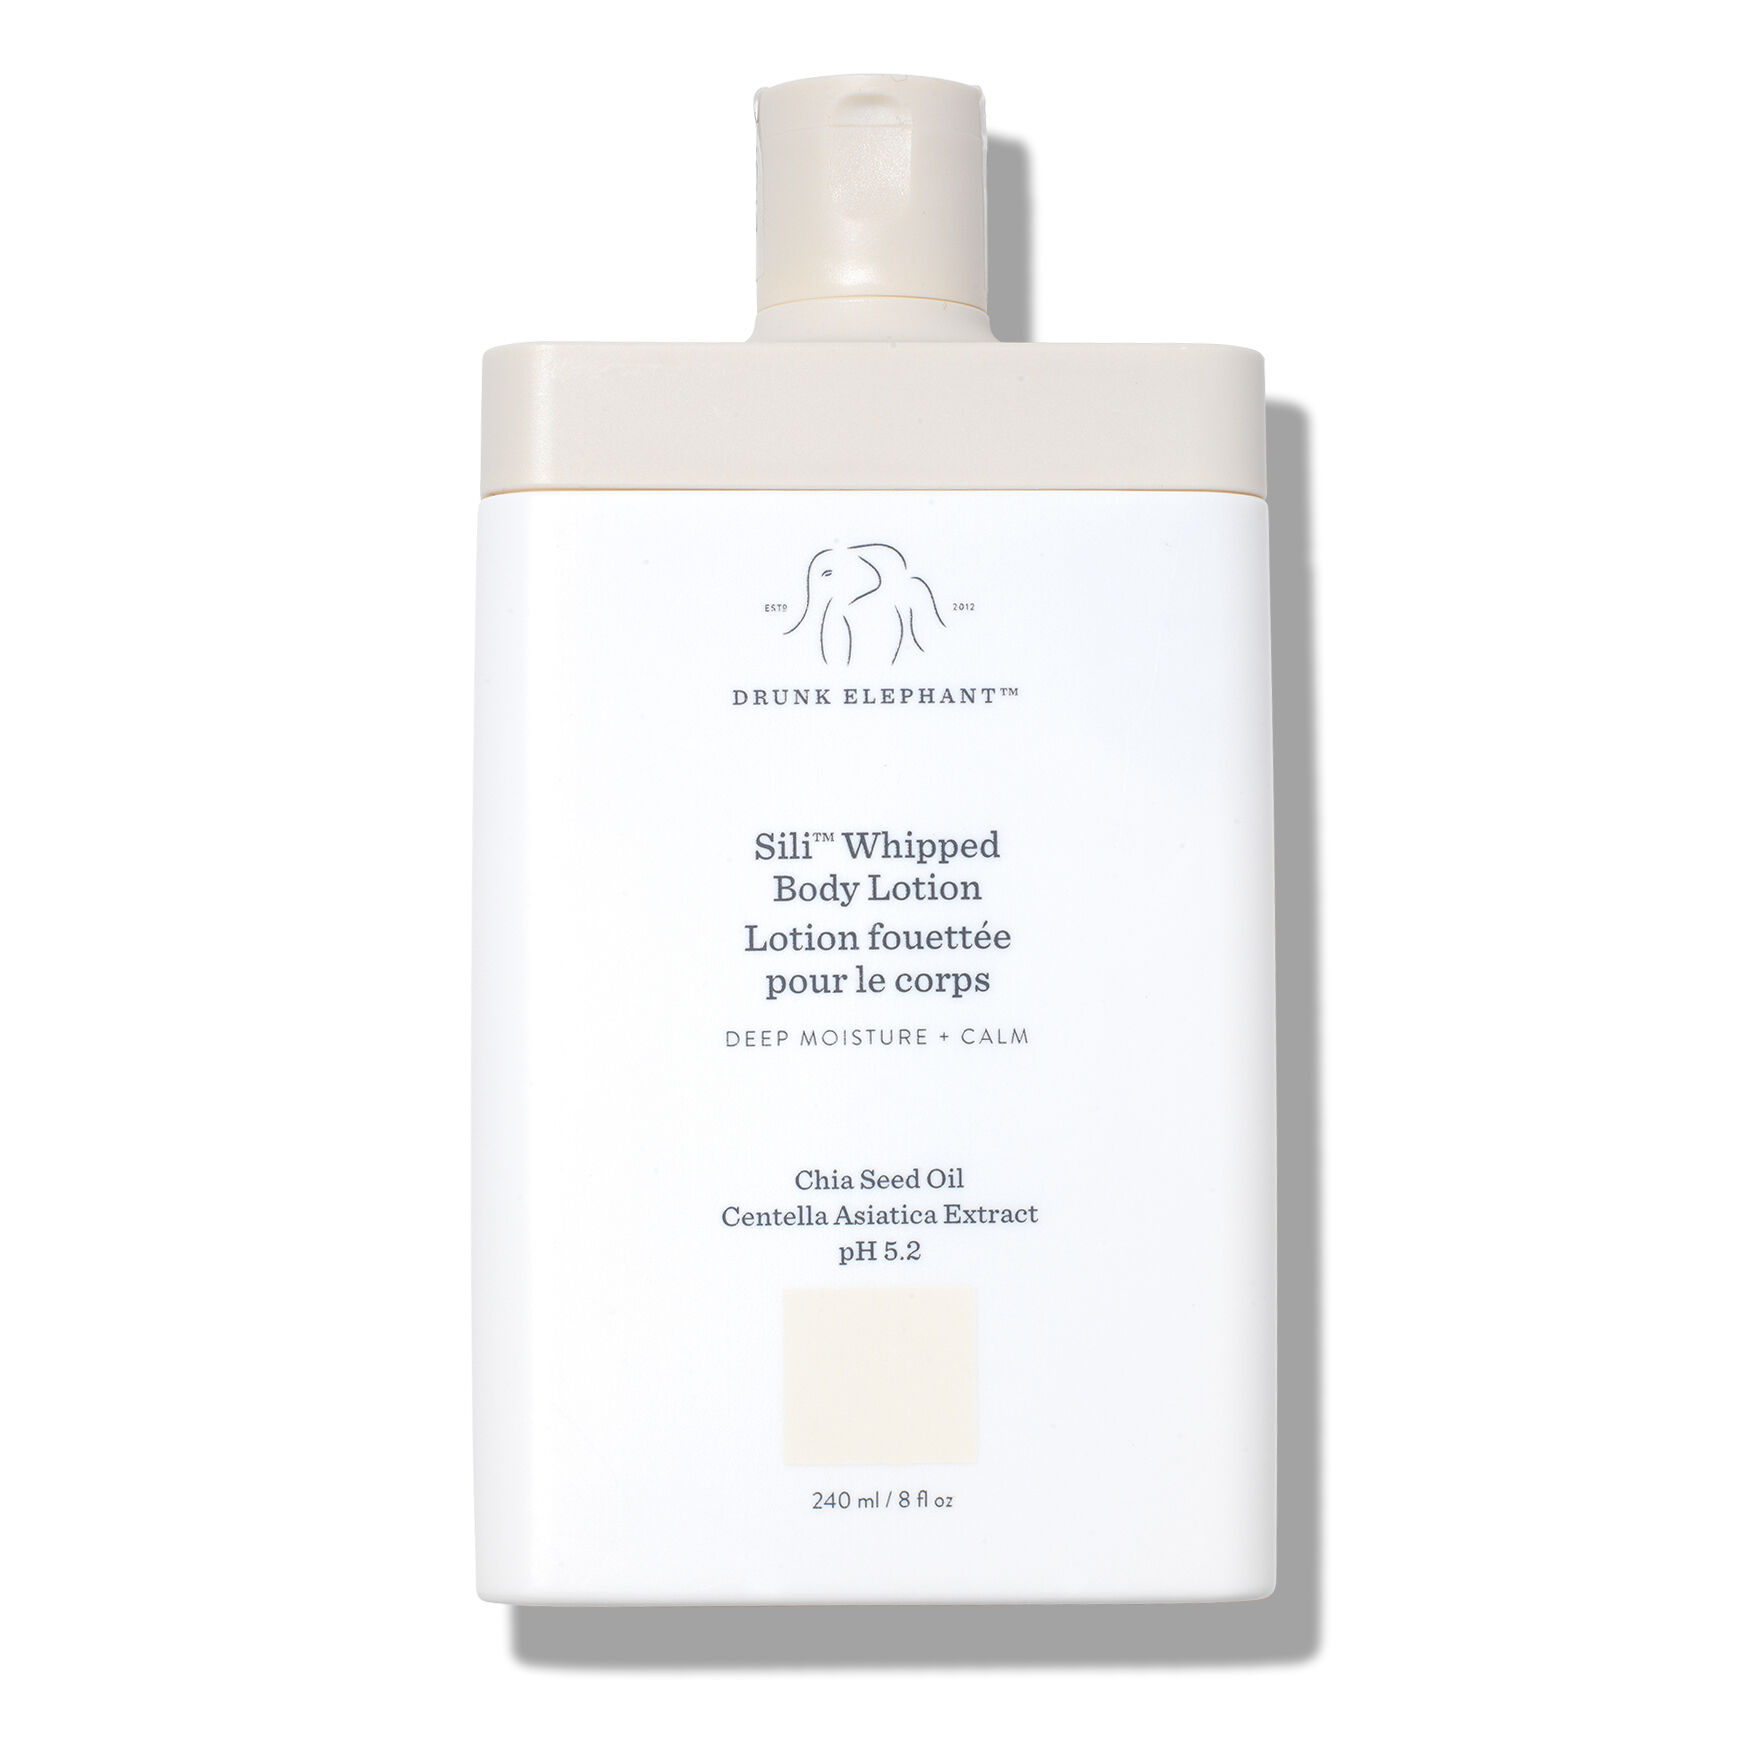 Drunk Elephant Sili™ Whipped Body Lotion | Space NK